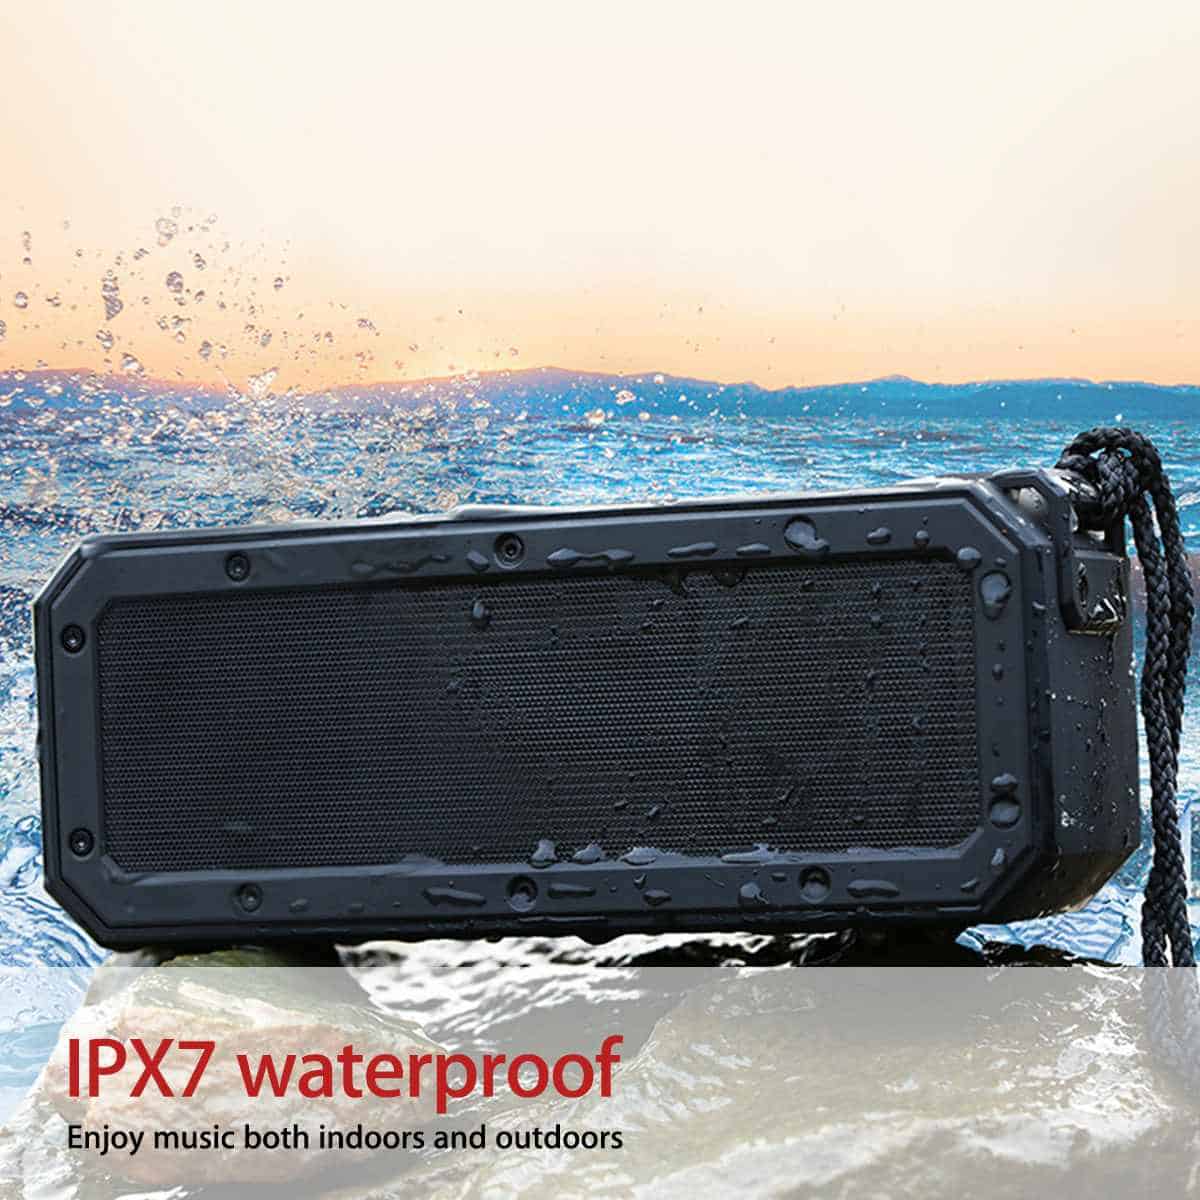 40W bluetooth 5.0 Speaker Column Portable Speaker IPX7 Waterproof Subwoofer with 360 Stereo Sound Outdoor Speakers Boombox